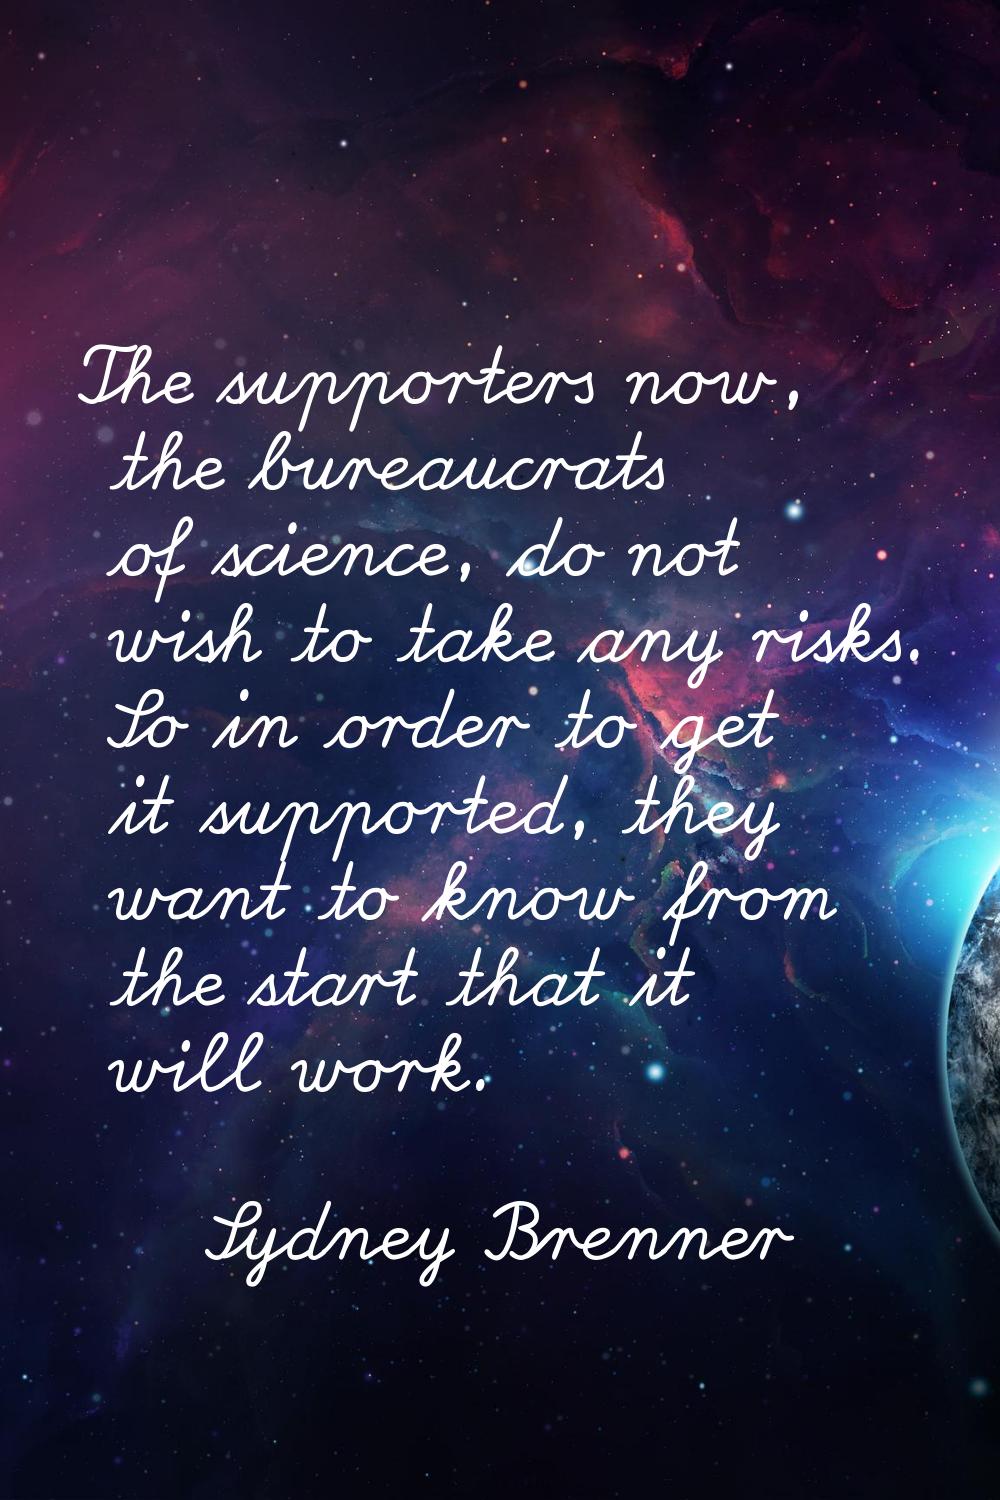 The supporters now, the bureaucrats of science, do not wish to take any risks. So in order to get i